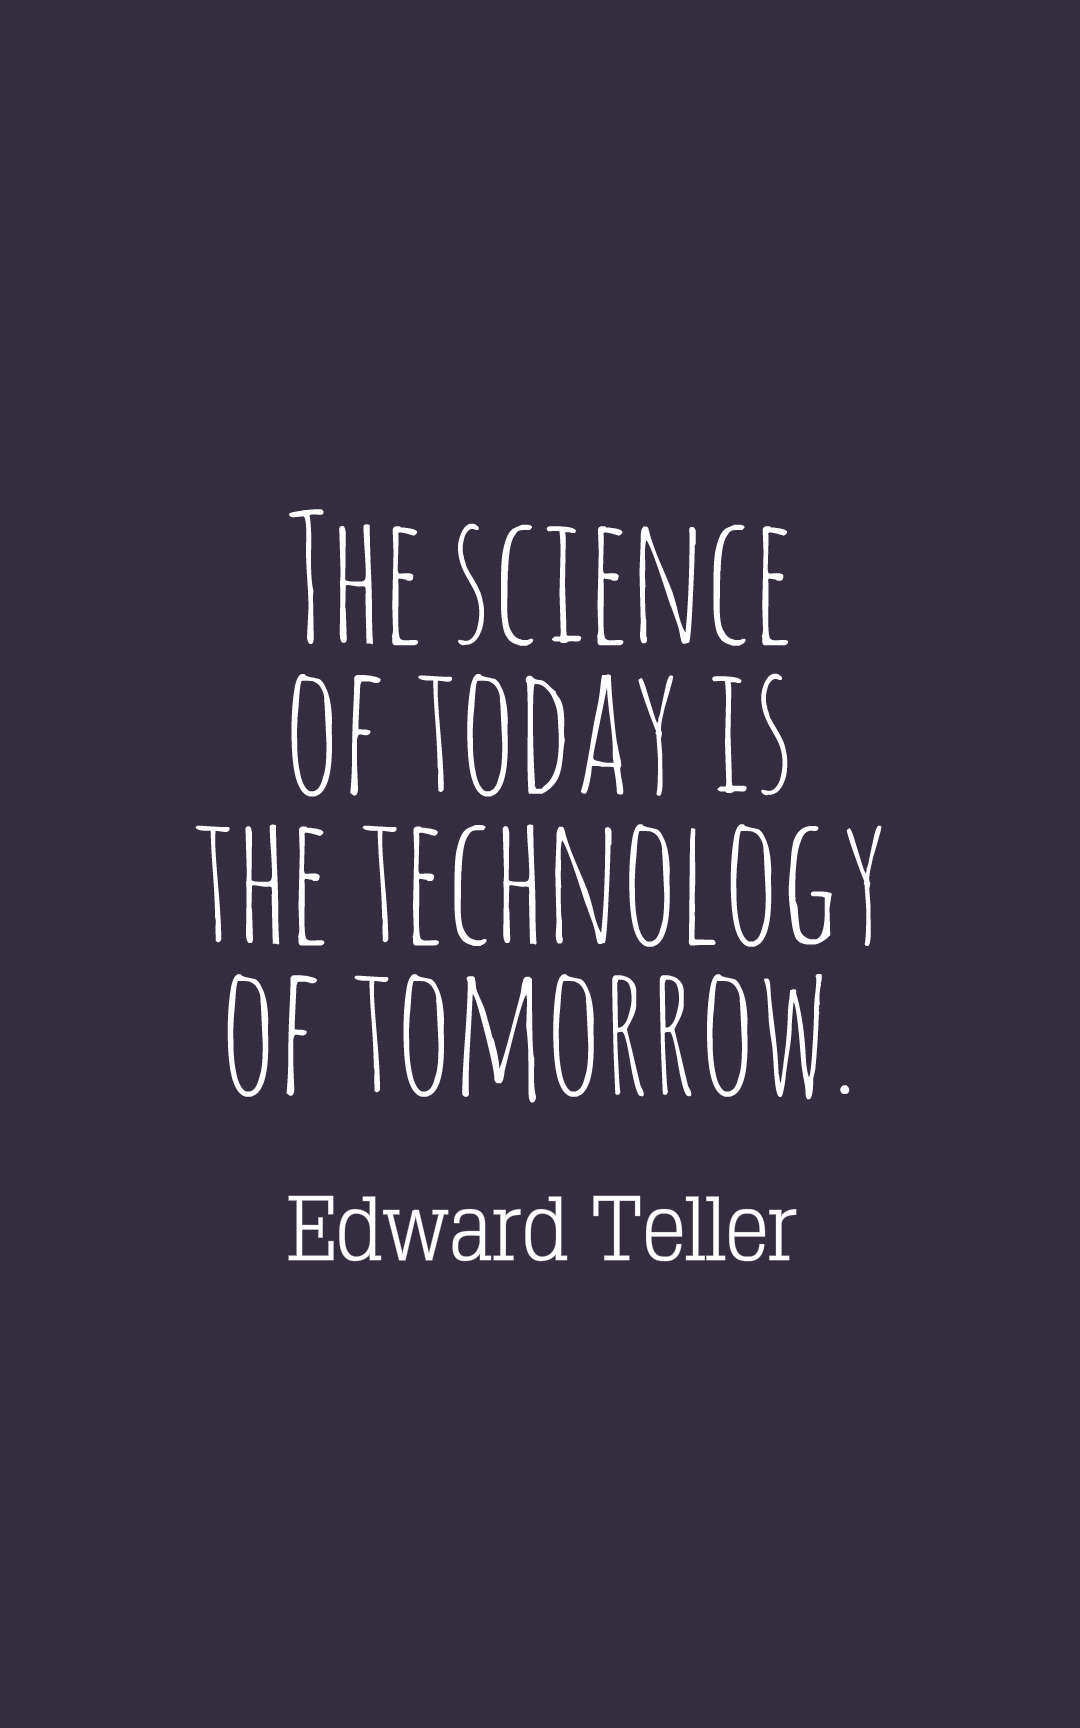 Famous Quotes On Science and Technology